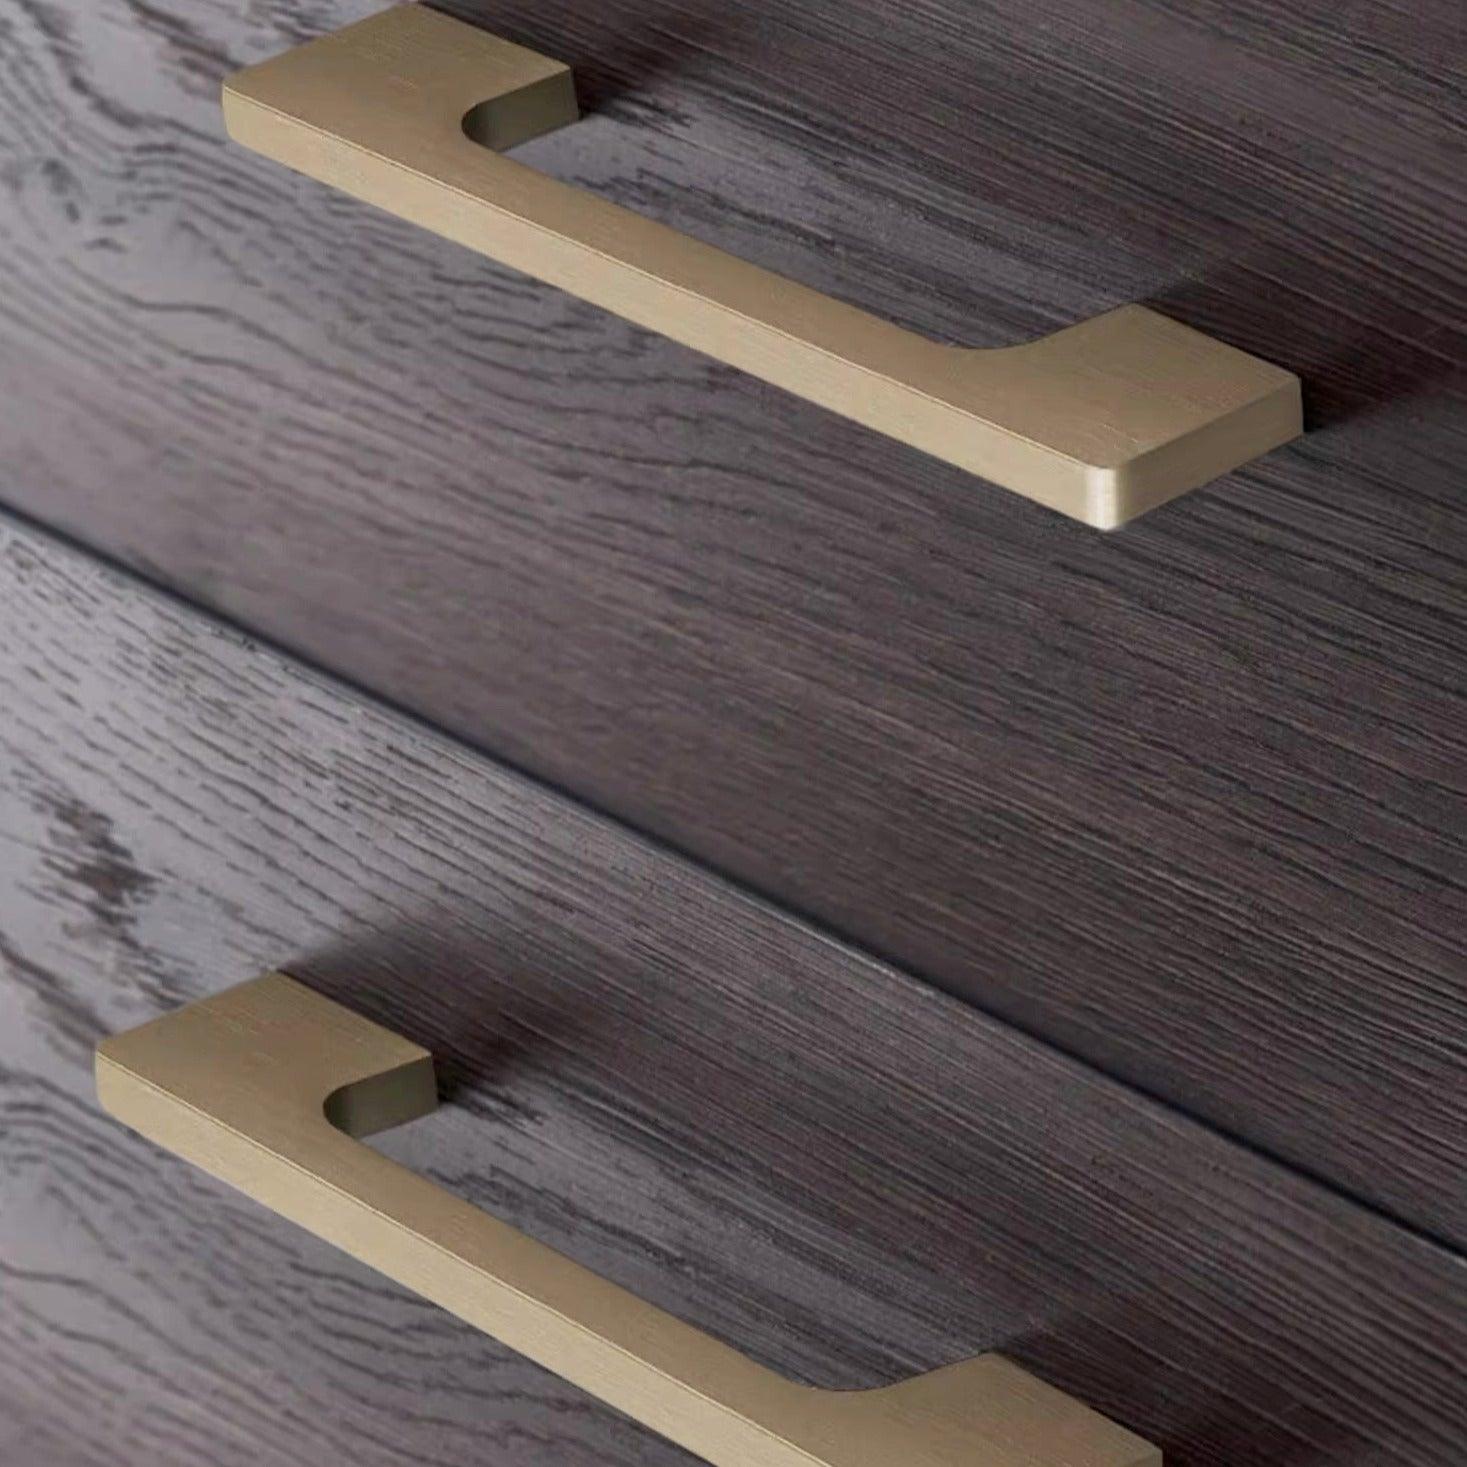 LUXO / LONG CABINET PULL HANDLES - Handle Shop Couture 